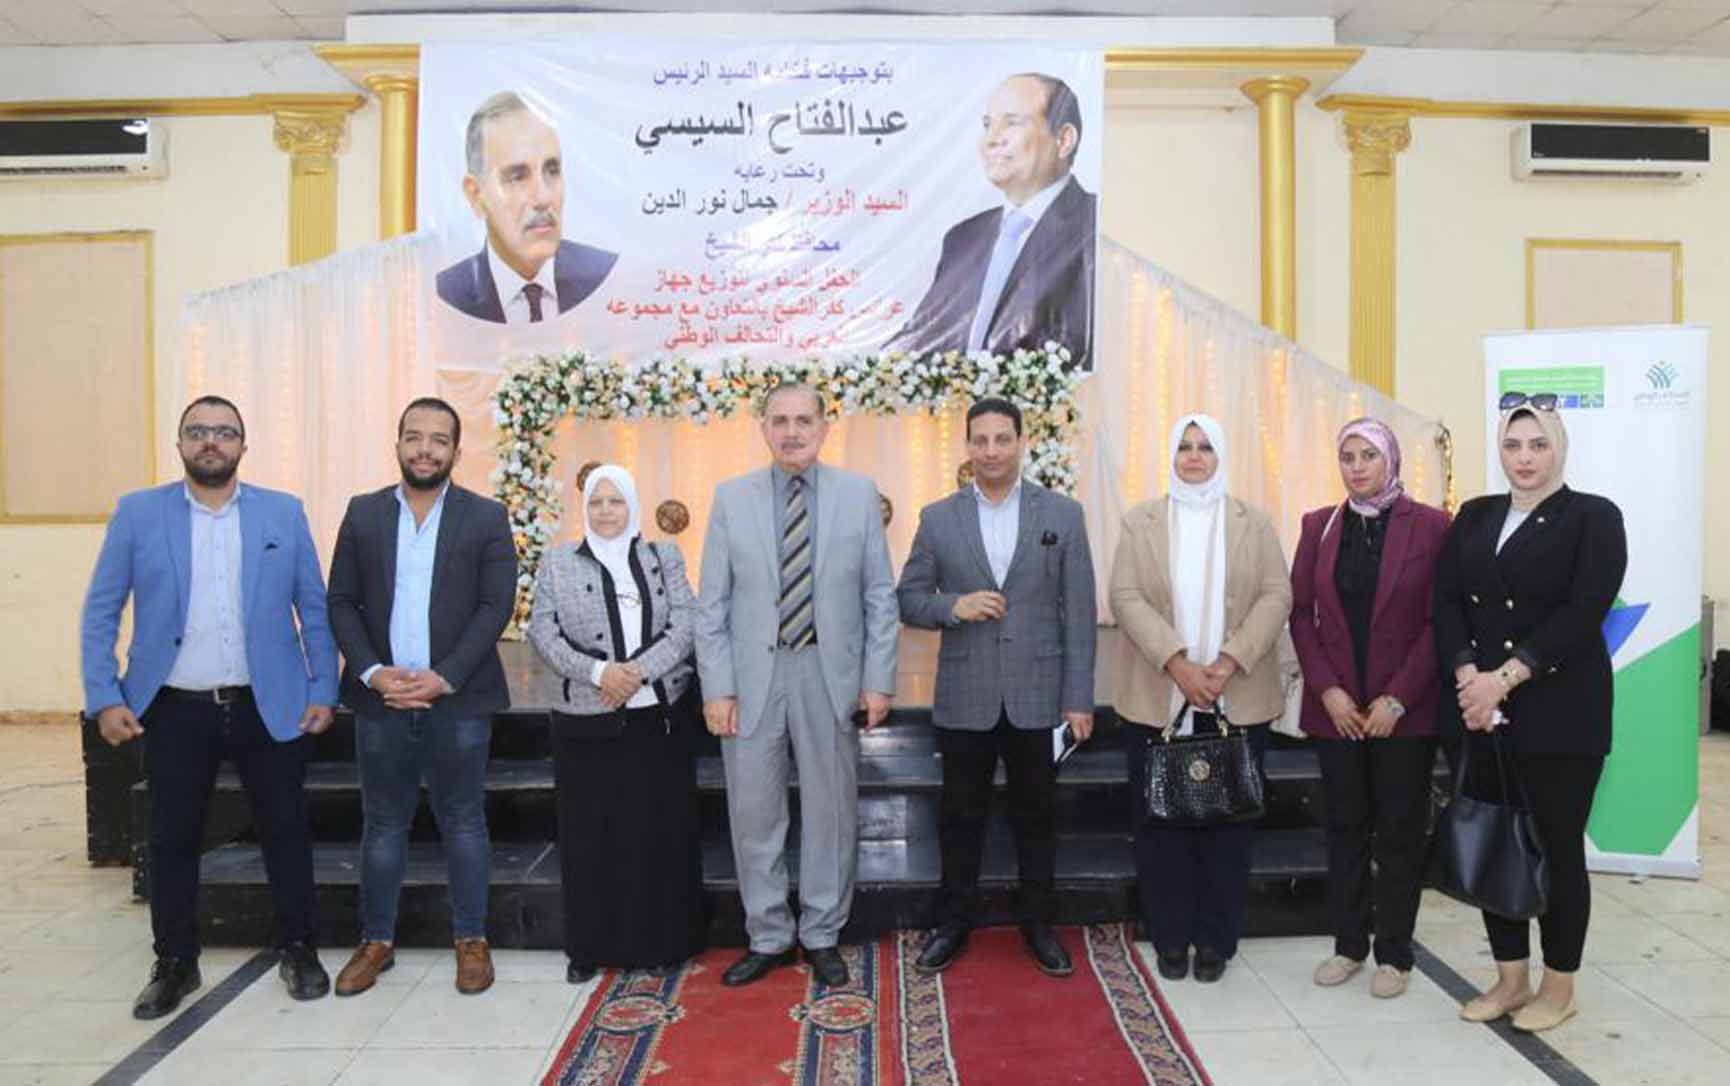 ELARABY Foundation for Community Development Continues its Charitable Activities across Egypt